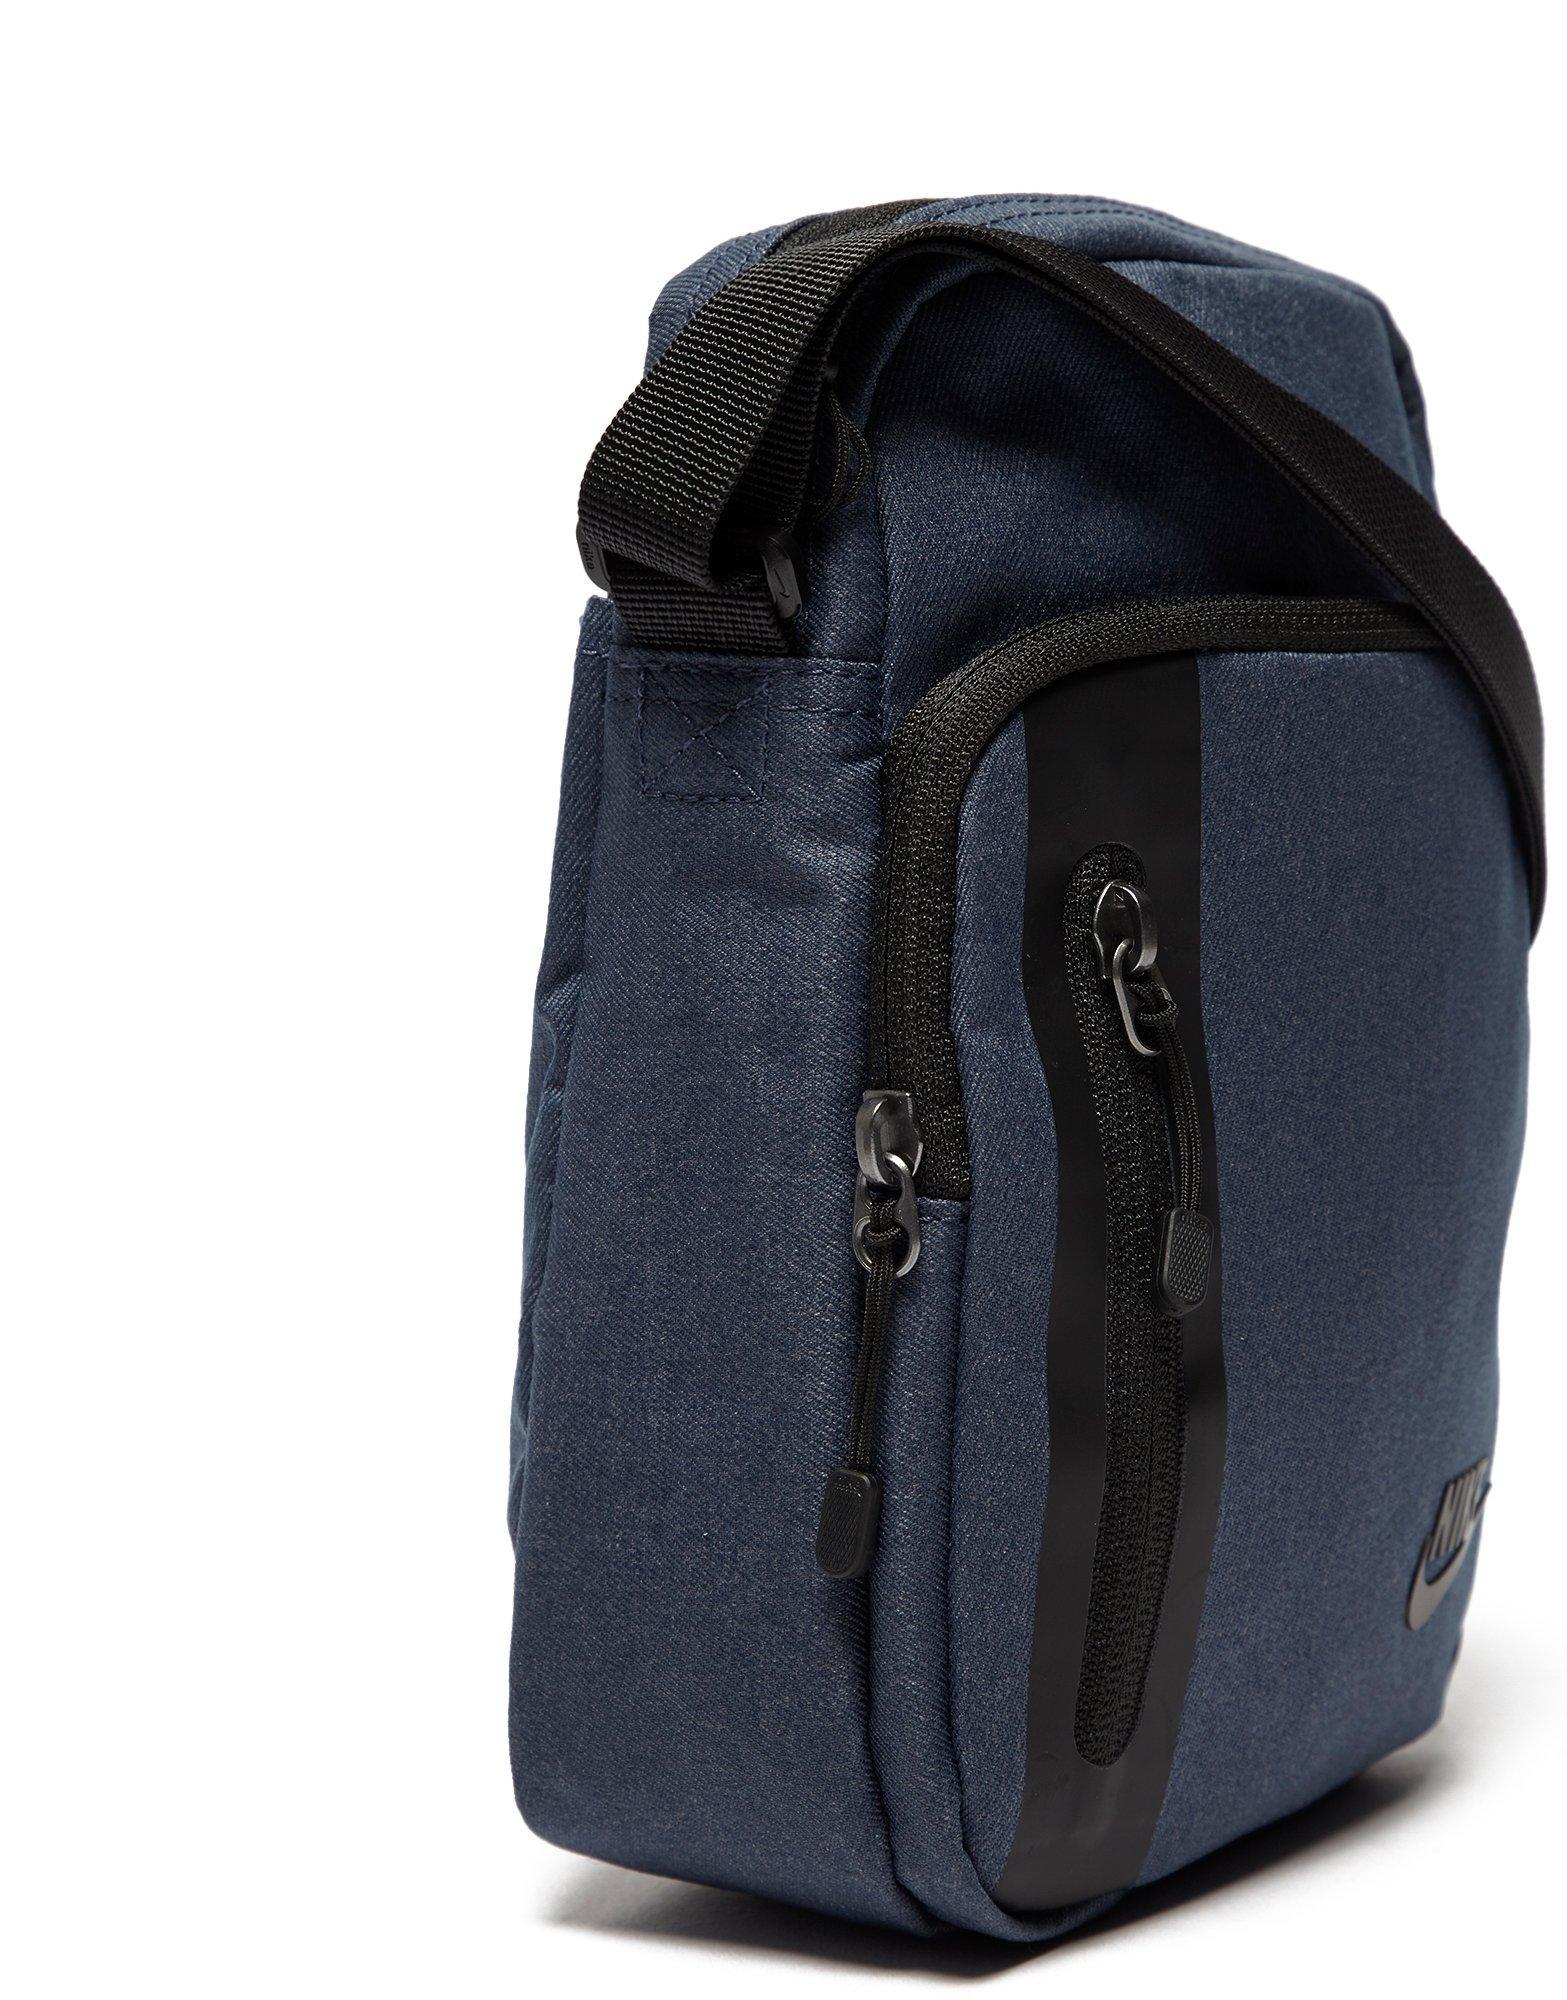 Lyst - Nike Core Small Crossbody Bag in Blue for Men